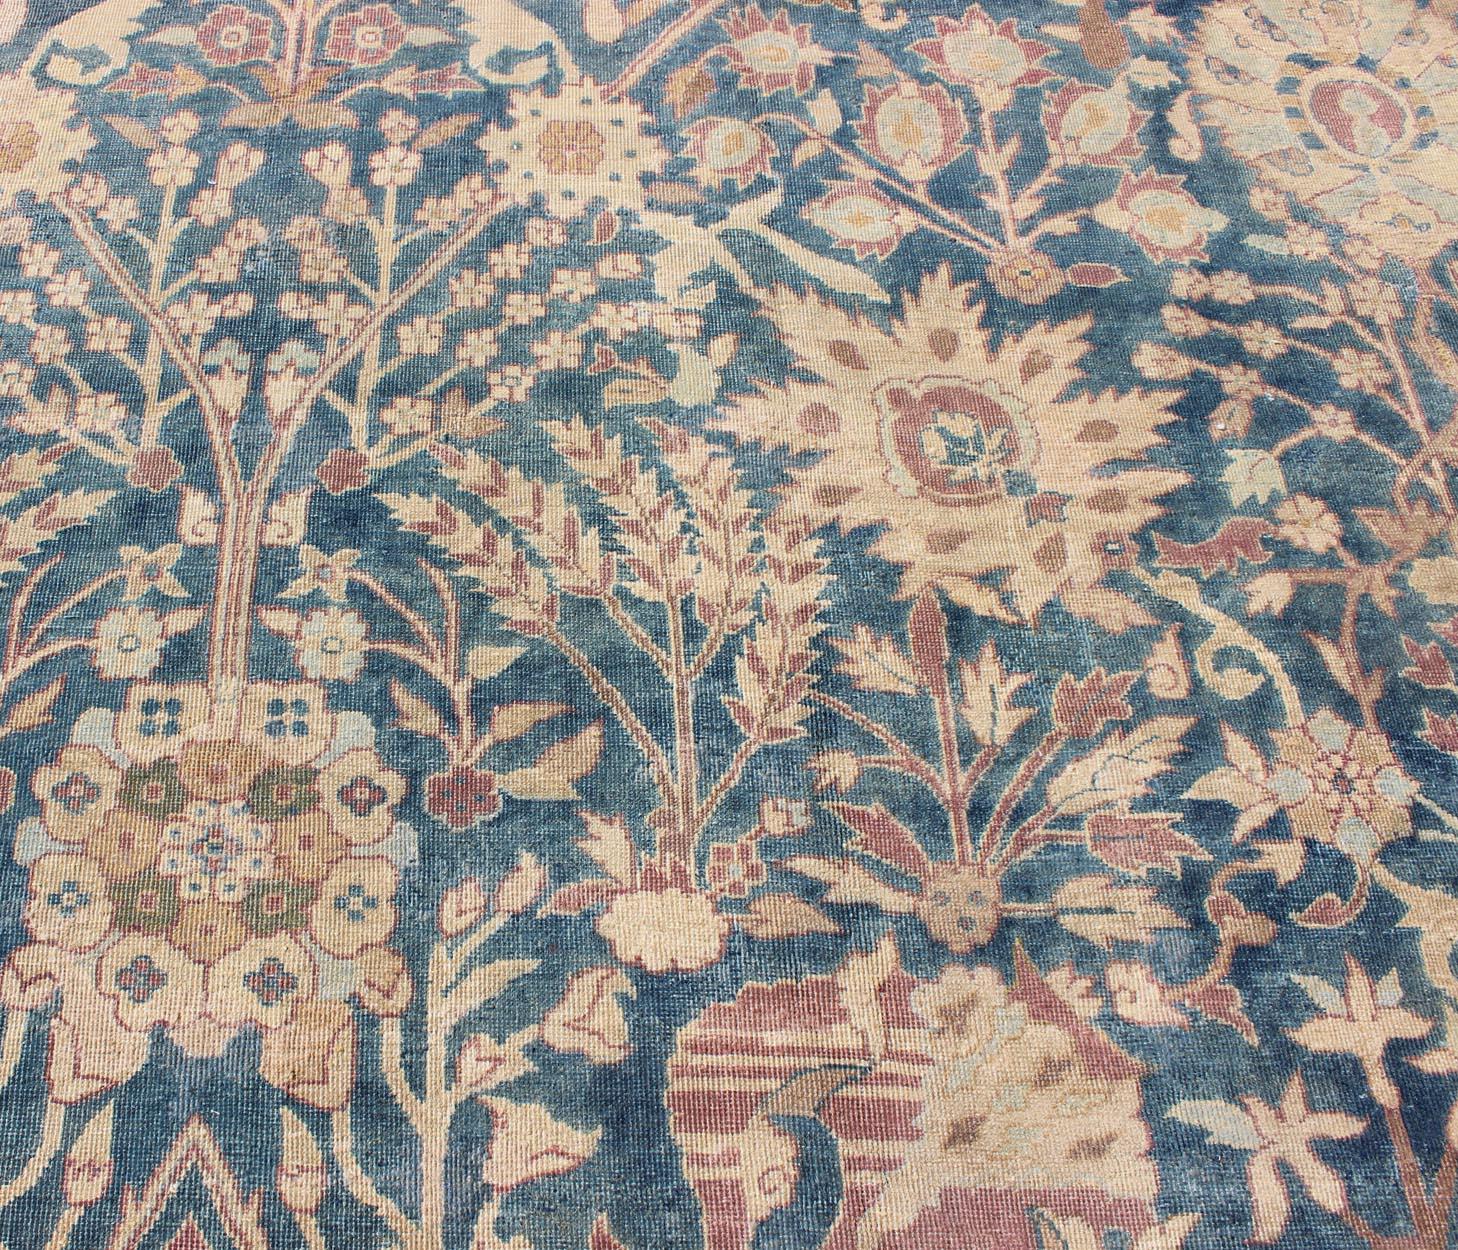 Stunning Antique Indian Agra 19th Century Vase Carpet in Teal Background For Sale 6